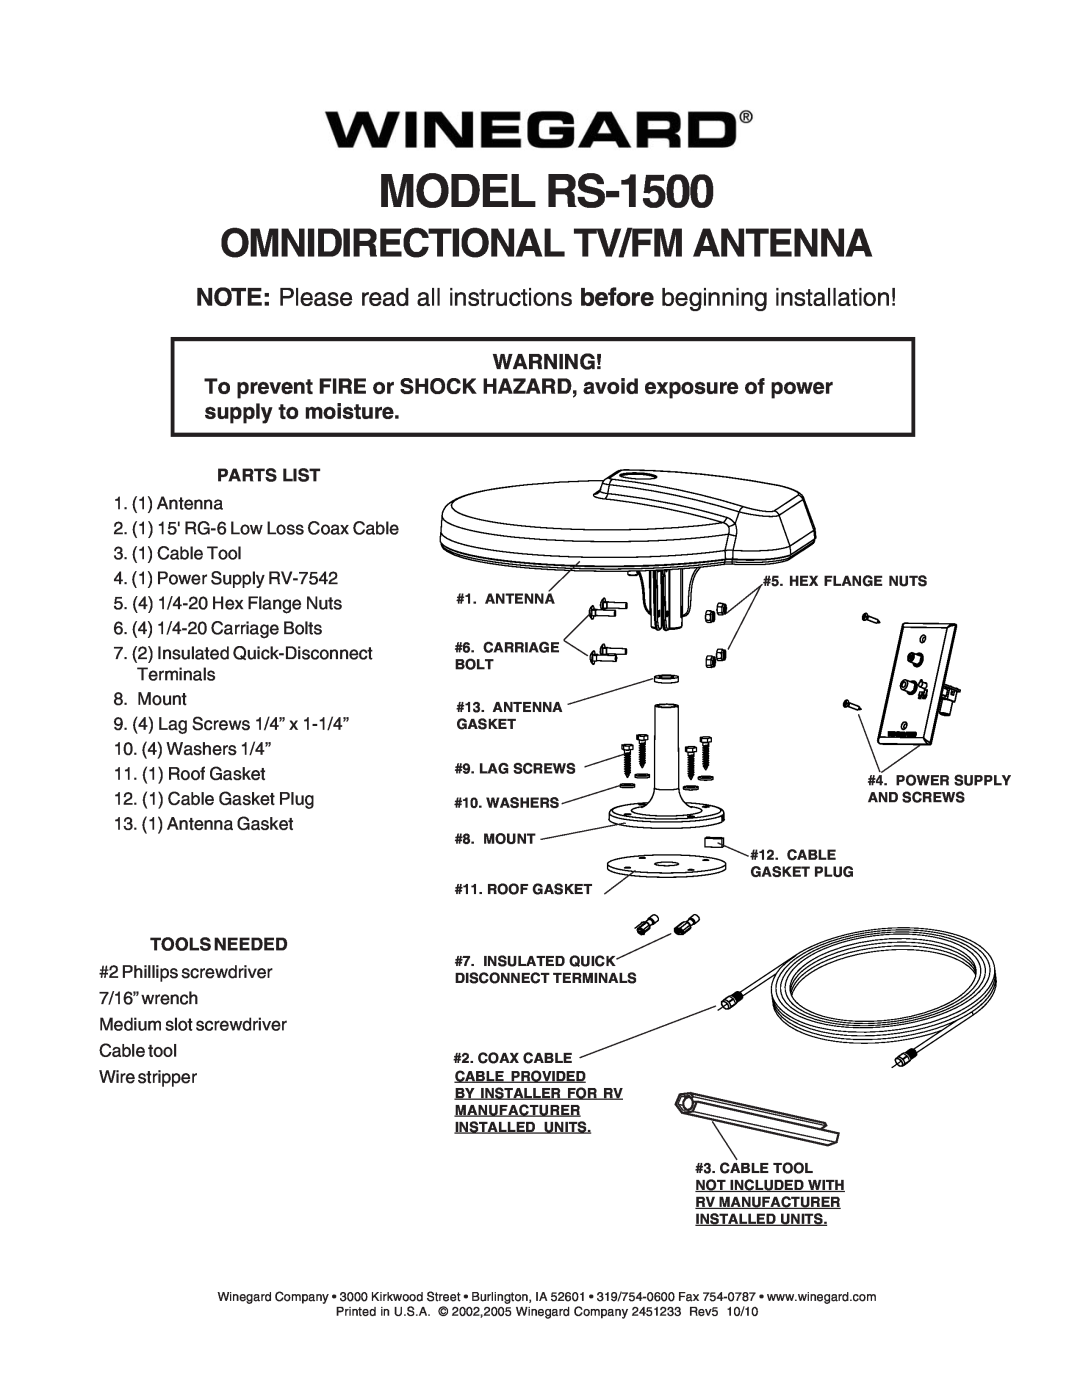 Winegard manual Parts List, Tools Needed, MODEL RS-1500, Omnidirectional Tv/Fm Antenna 